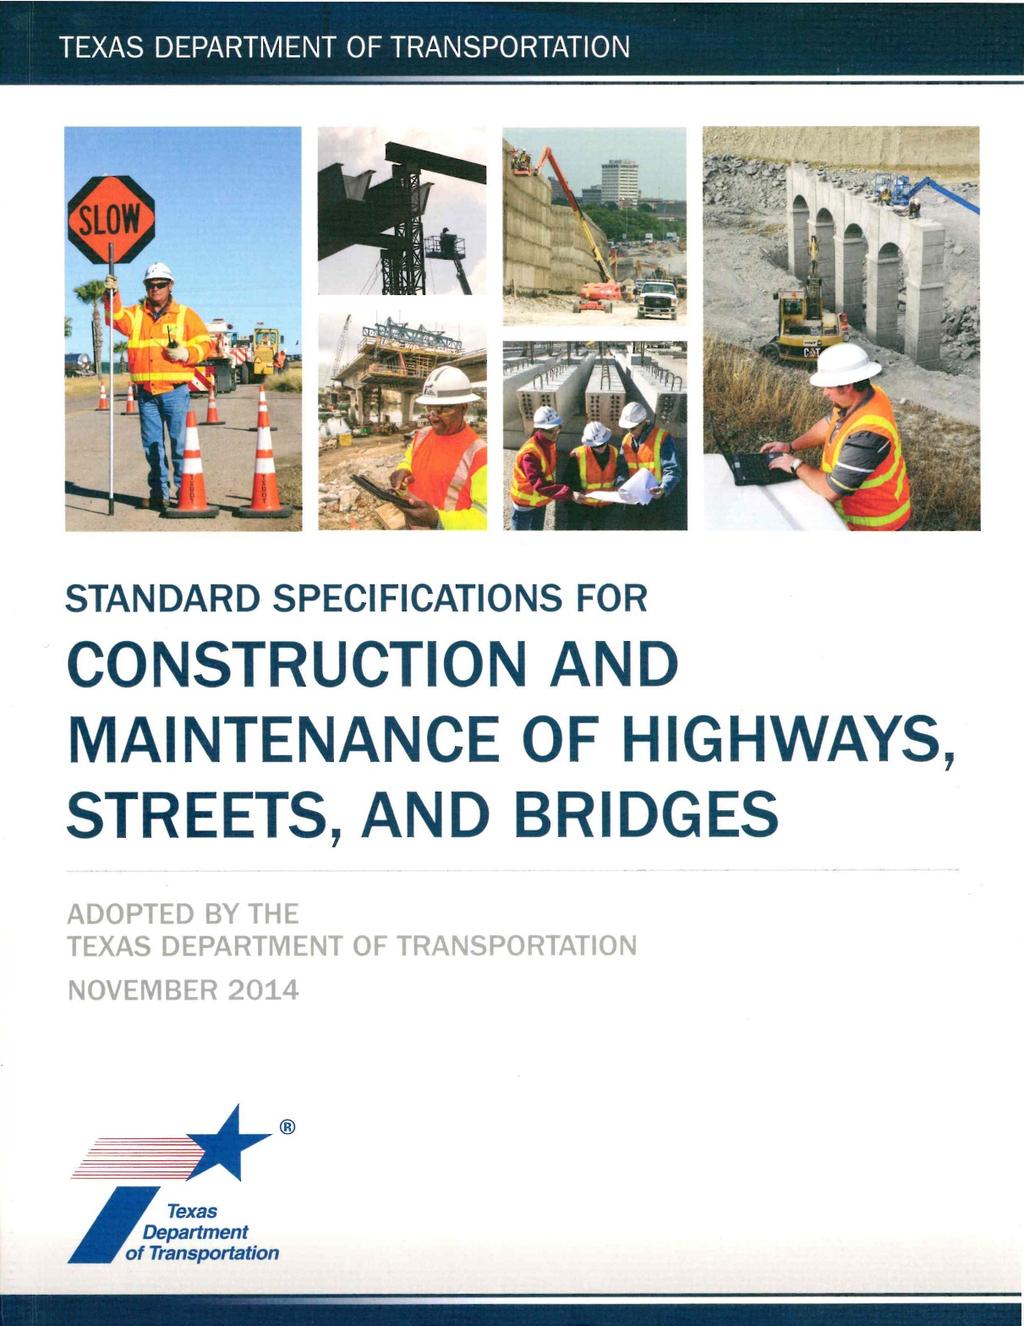 Standard Specifications Sets forth how TxDOT and the Contractor will